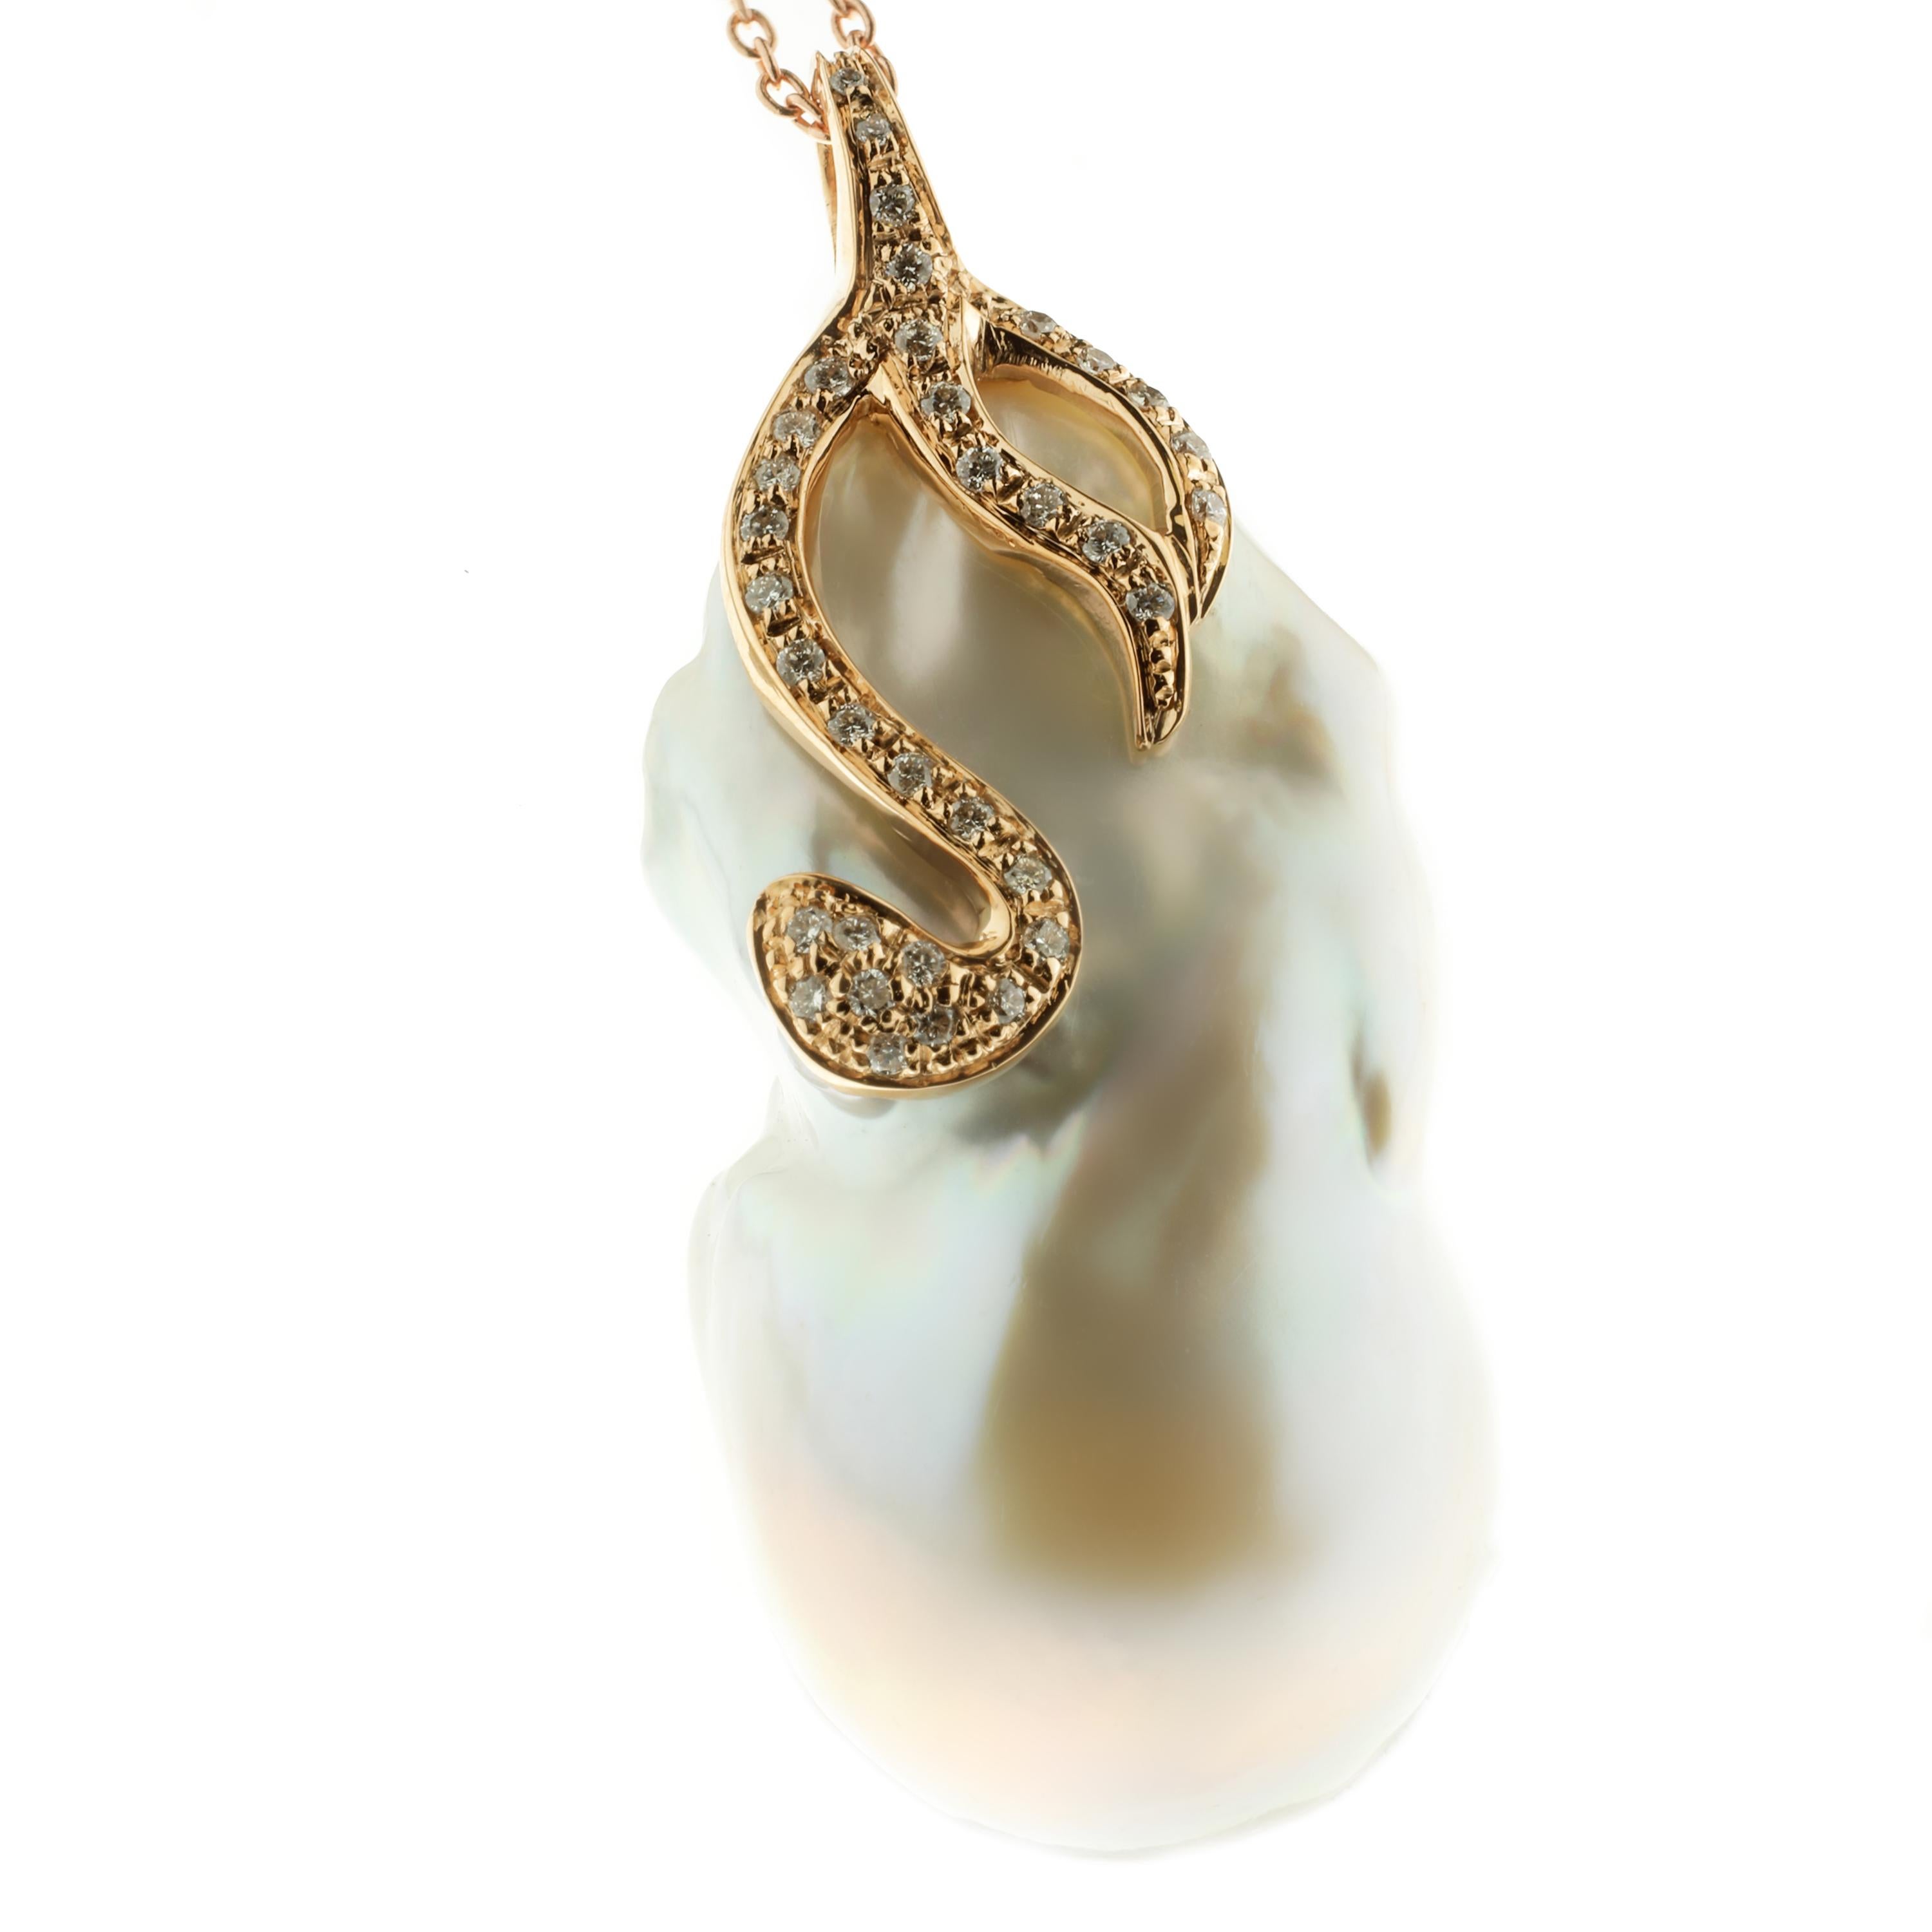 Masterfully created entirely by hand, this lovely, jumbo-sized freshwater pearl and rose gold chain combination are spectacular. 

A fanciful, organic 18-karat rose gold shape, reminiscent of a serpent, set with white diamonds (G VS), loops